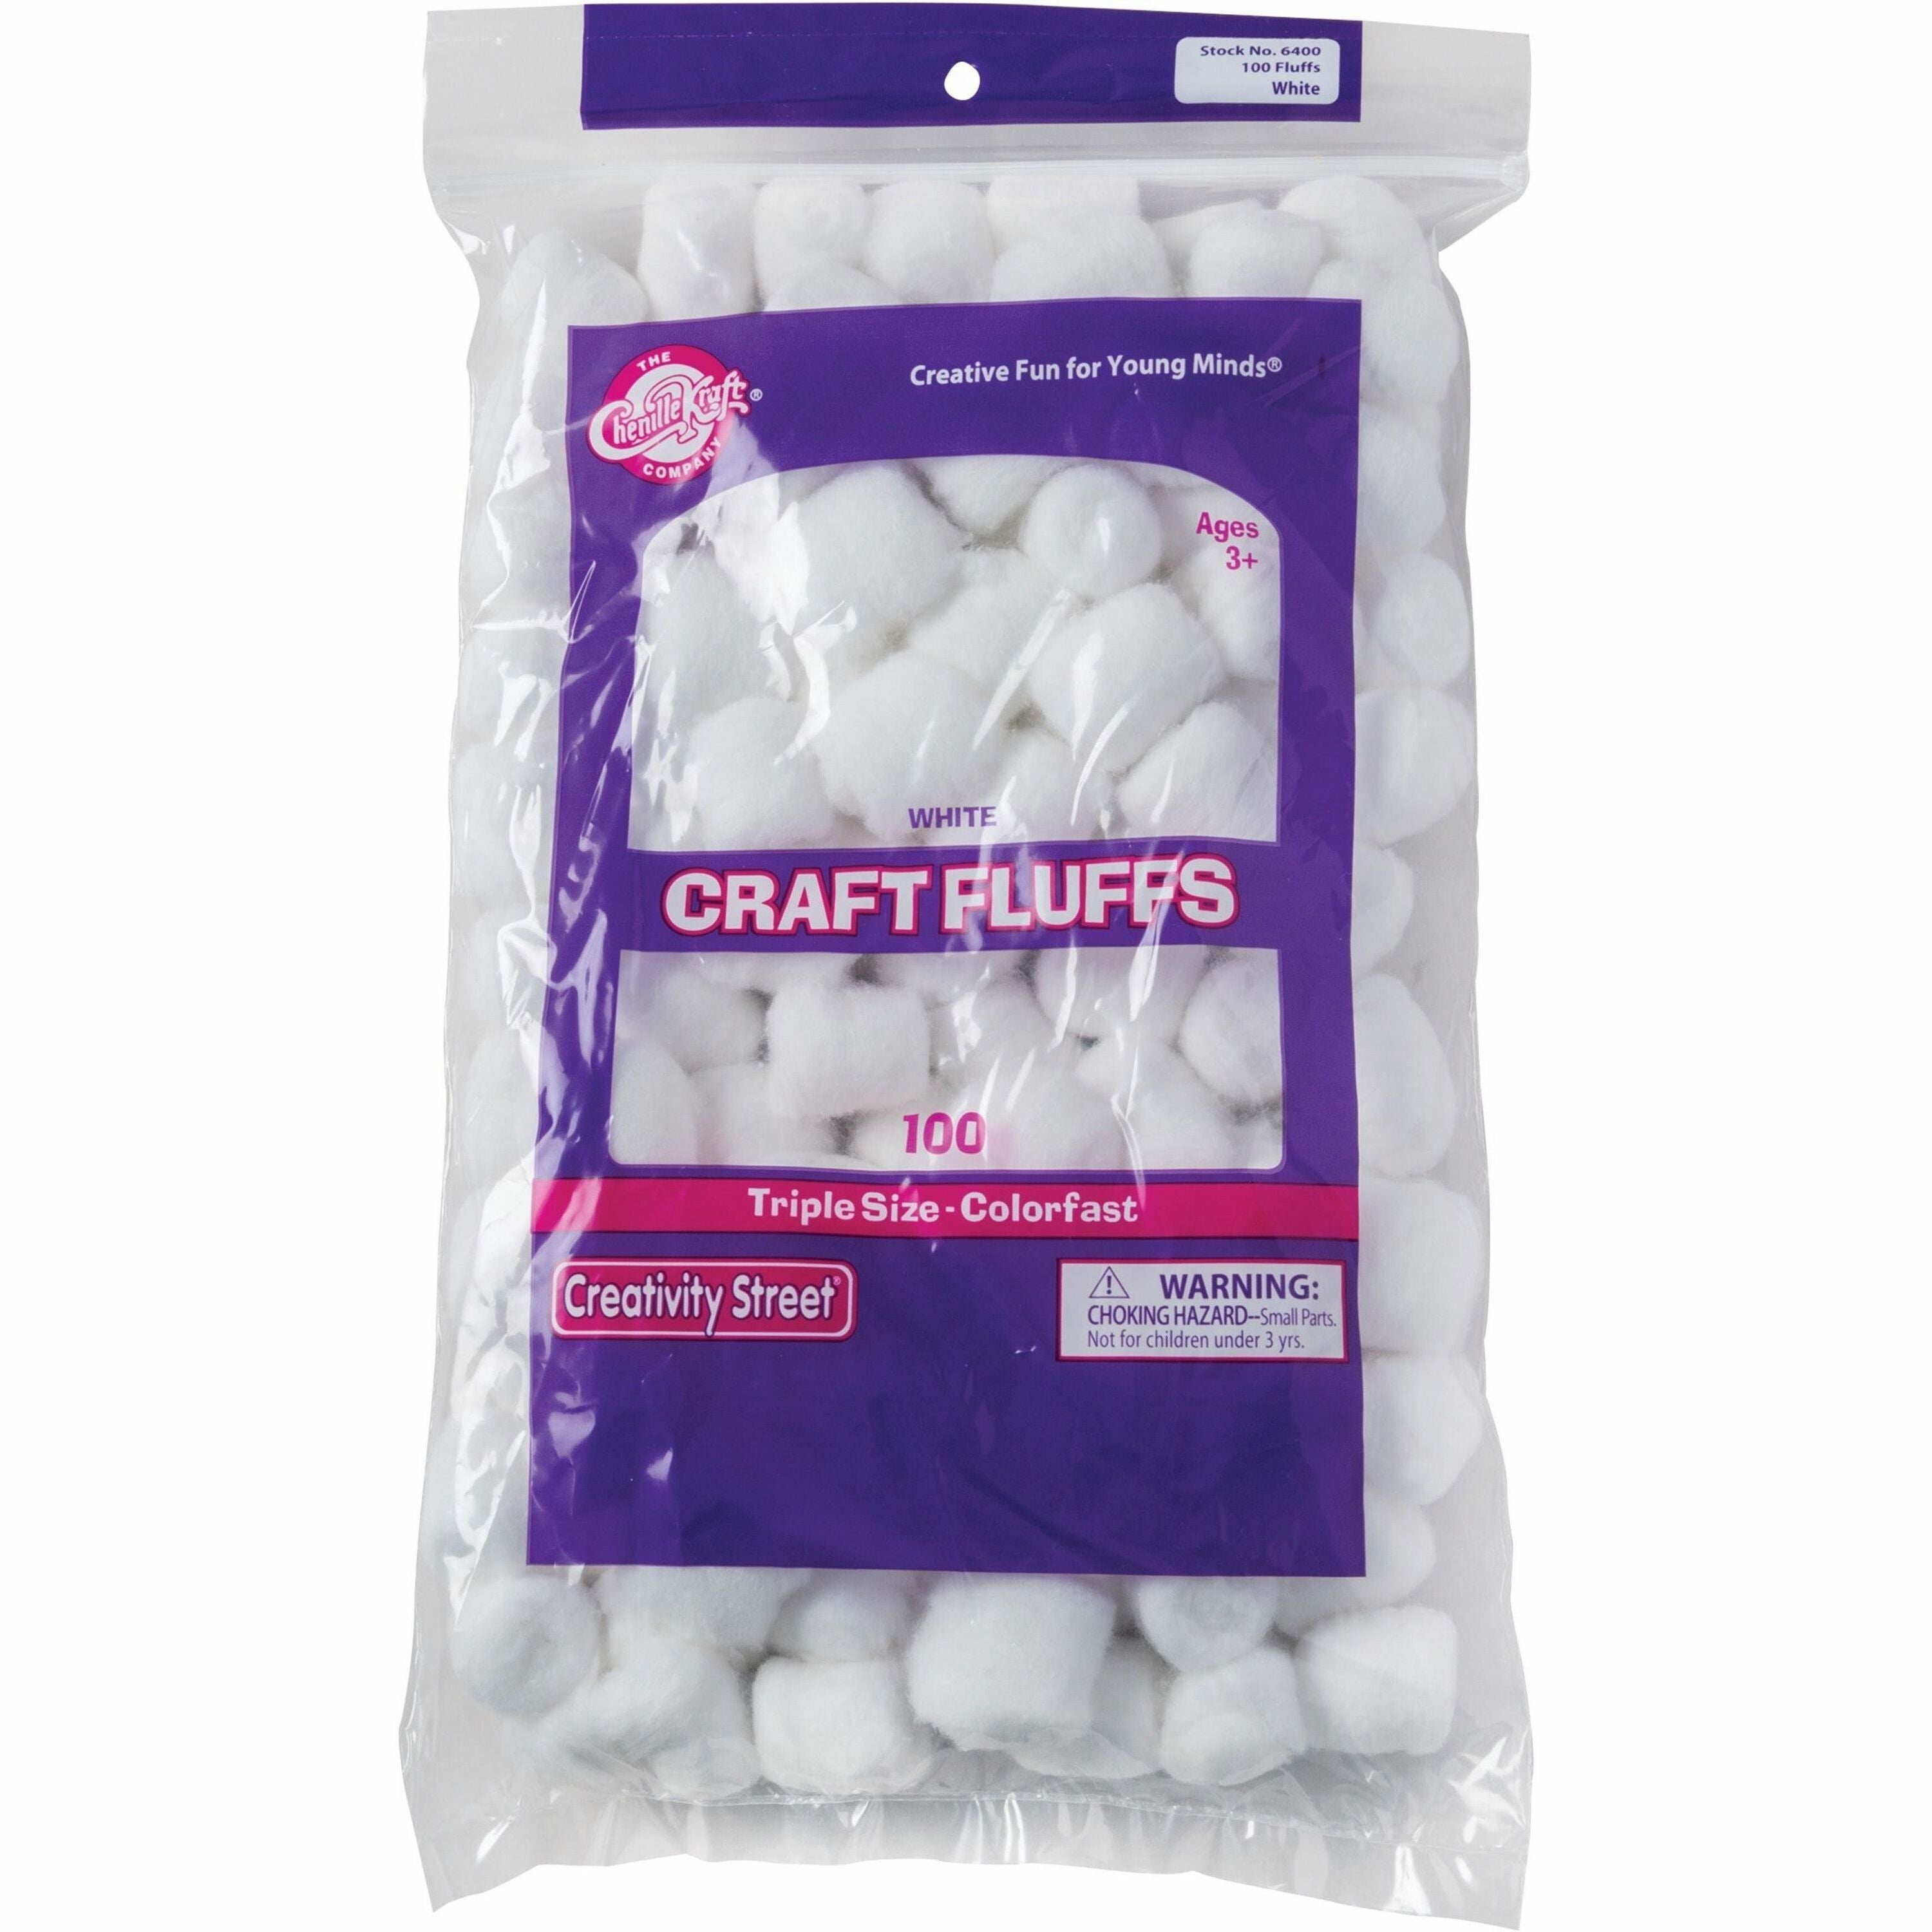 creativity-street-white-craft-fluffs-decoration-painting-100-pieces-100-pack-white_pac6400 - 1